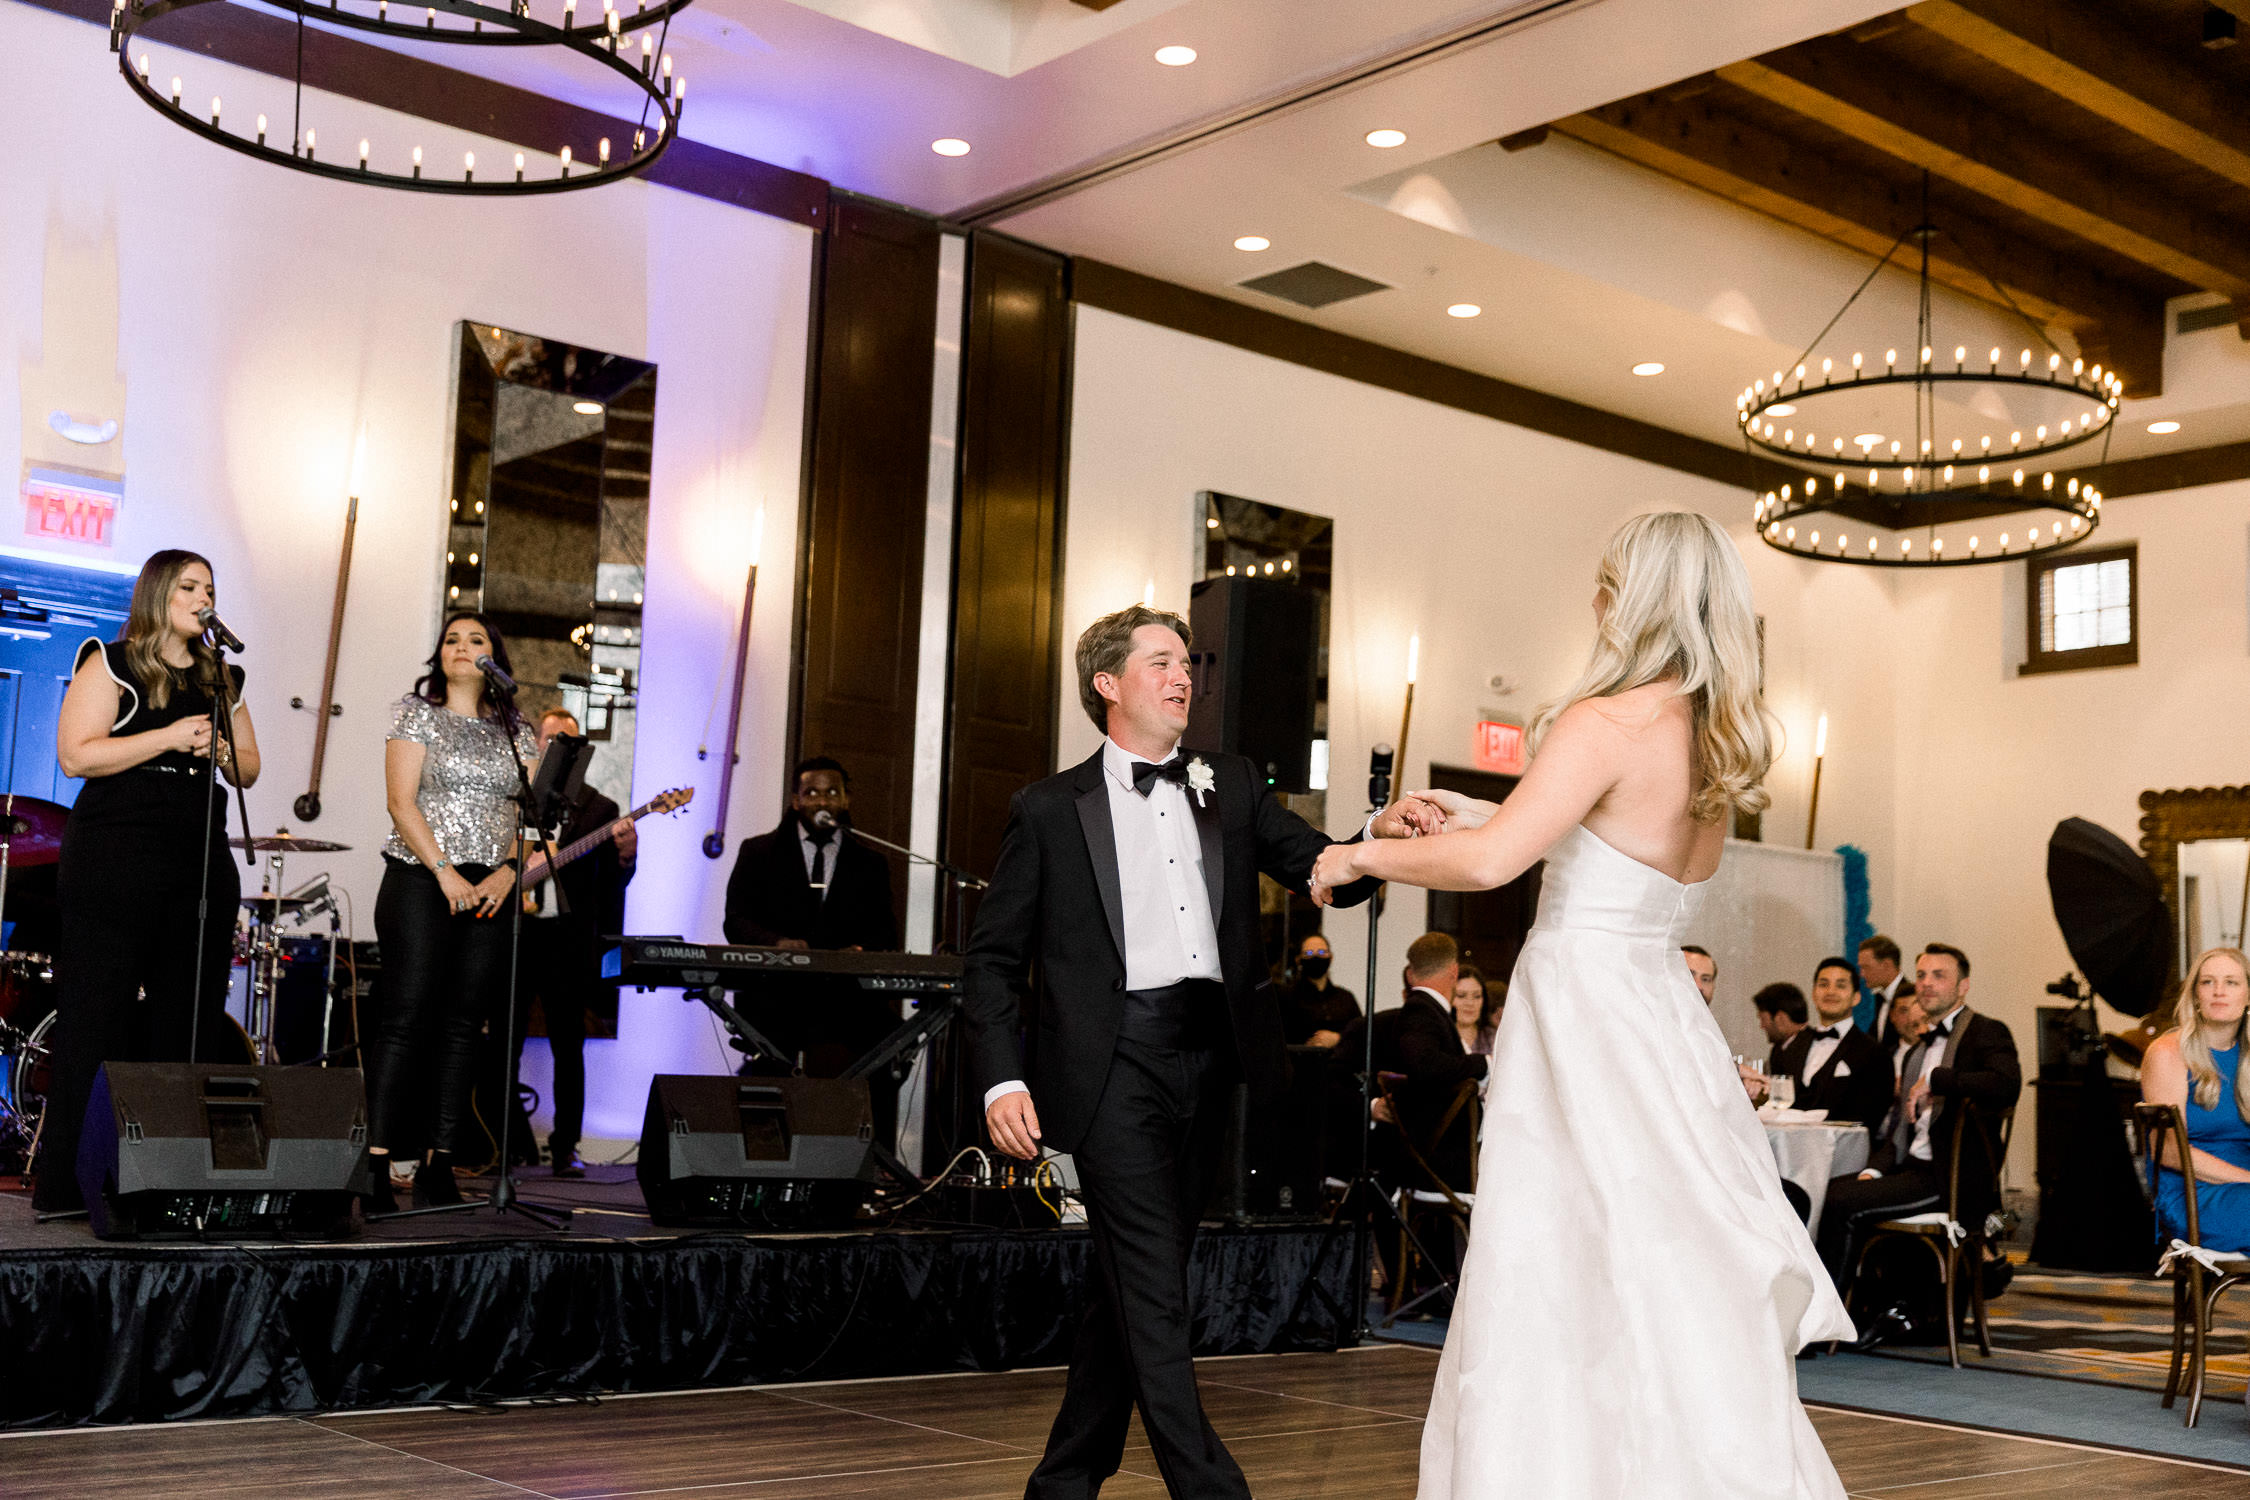 Bride and groom's first dance at their wedding.